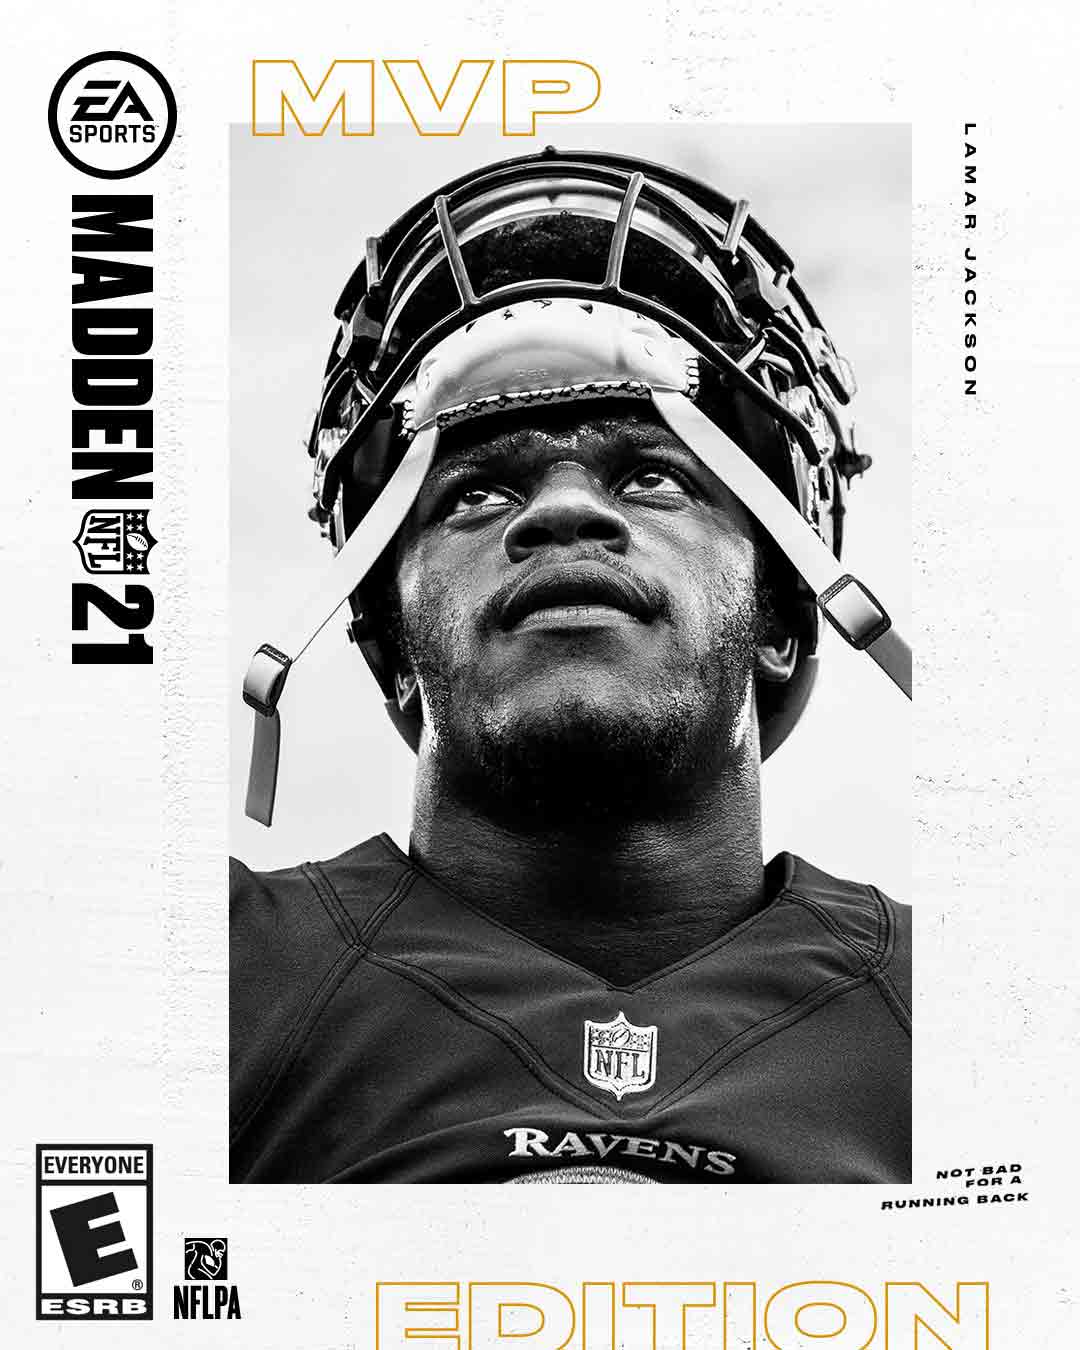 Complete Guideline: Madden NFL 21 review and game modes 3